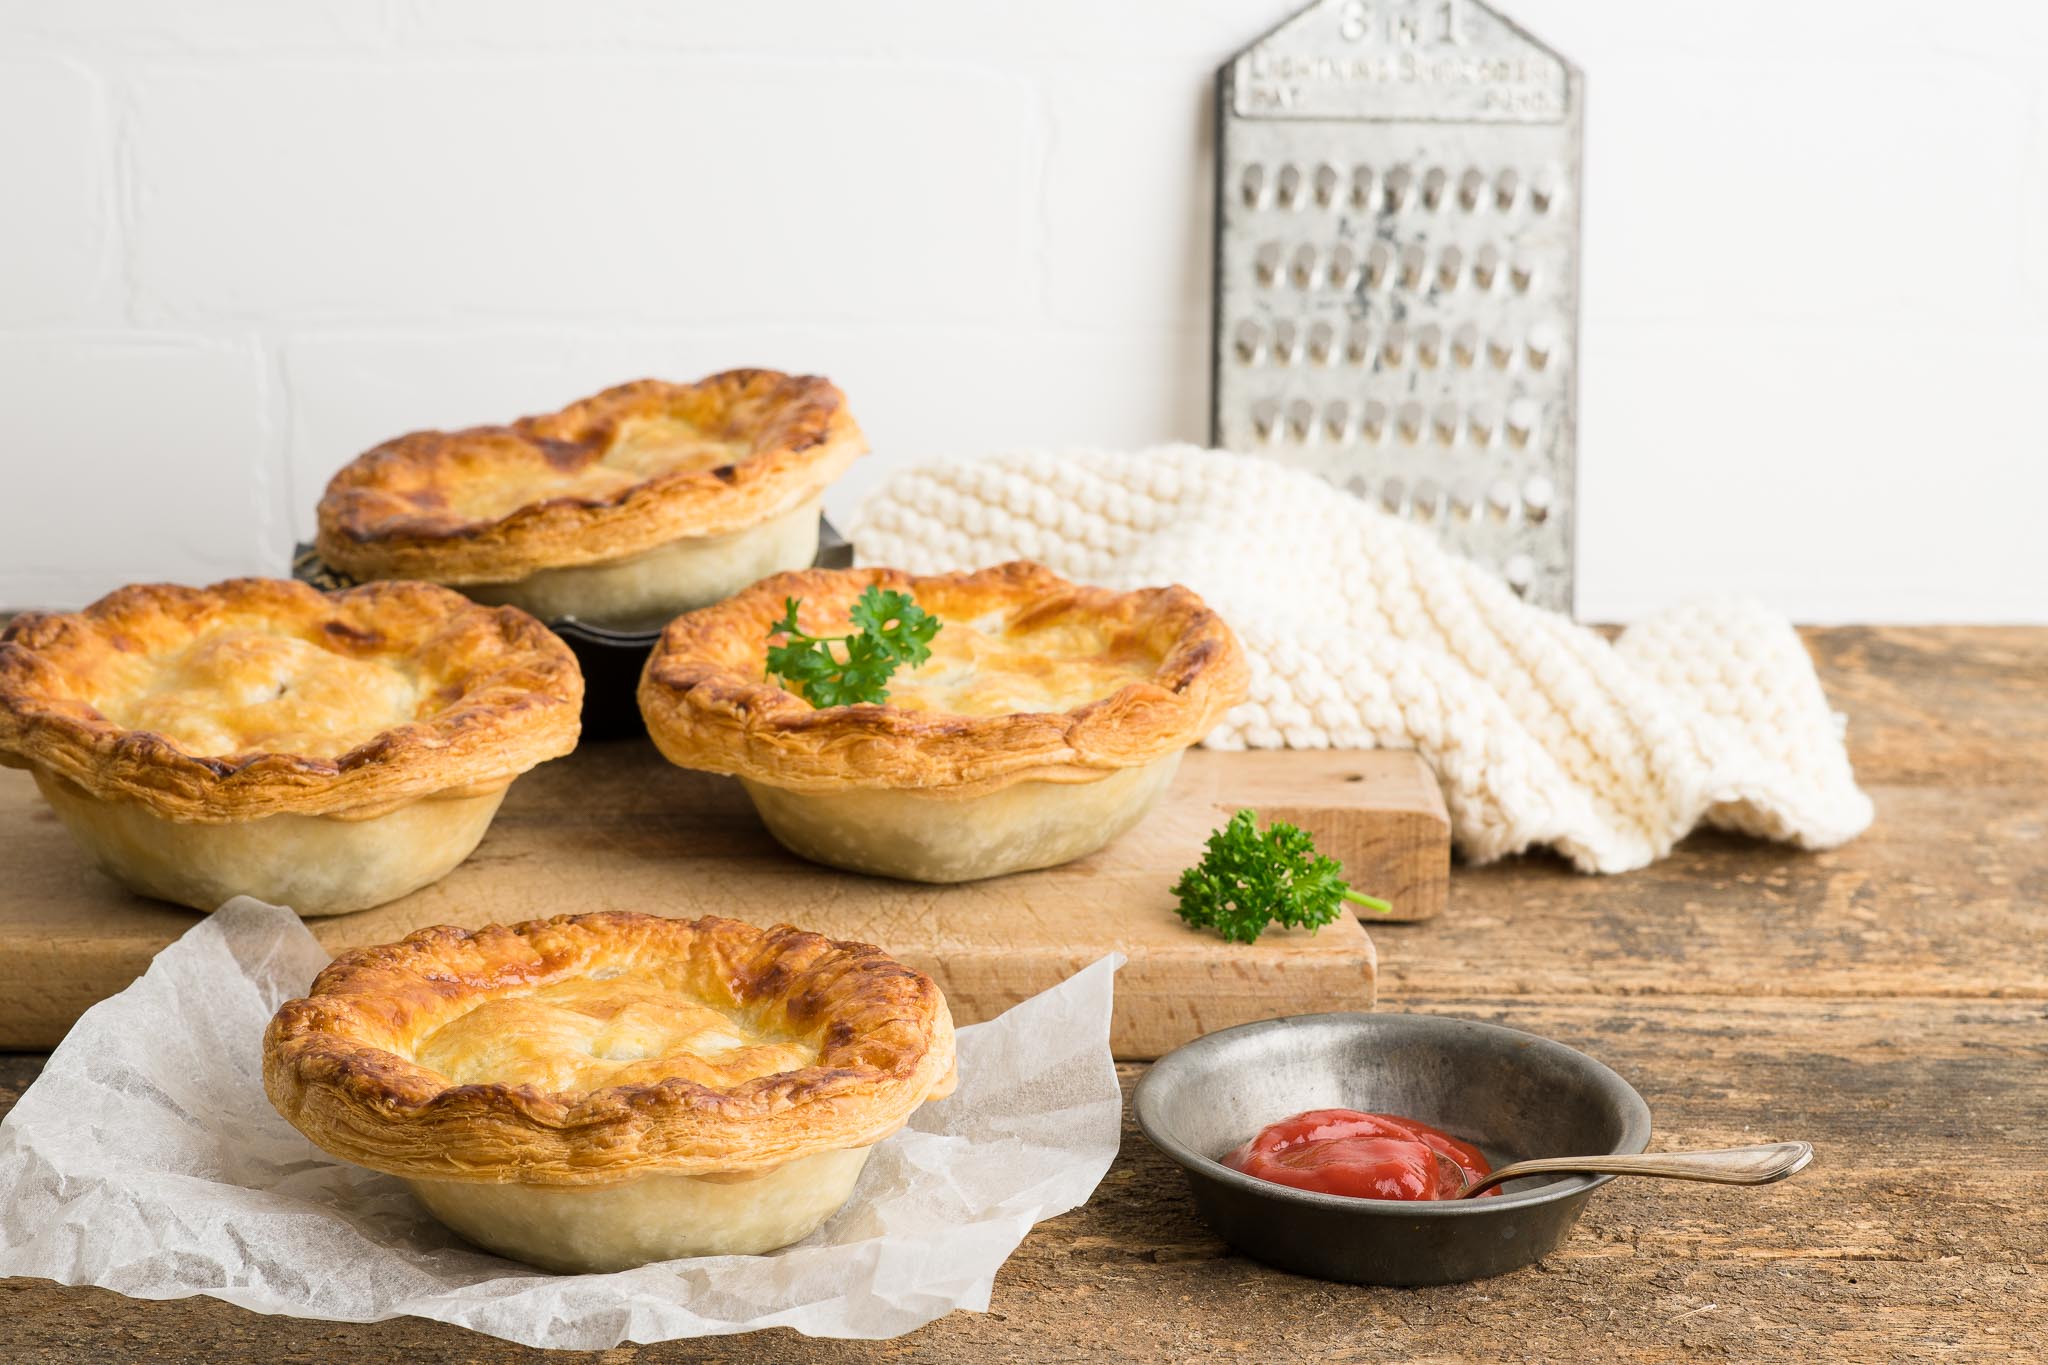 meat pies with beef and guinness filling on wooden board